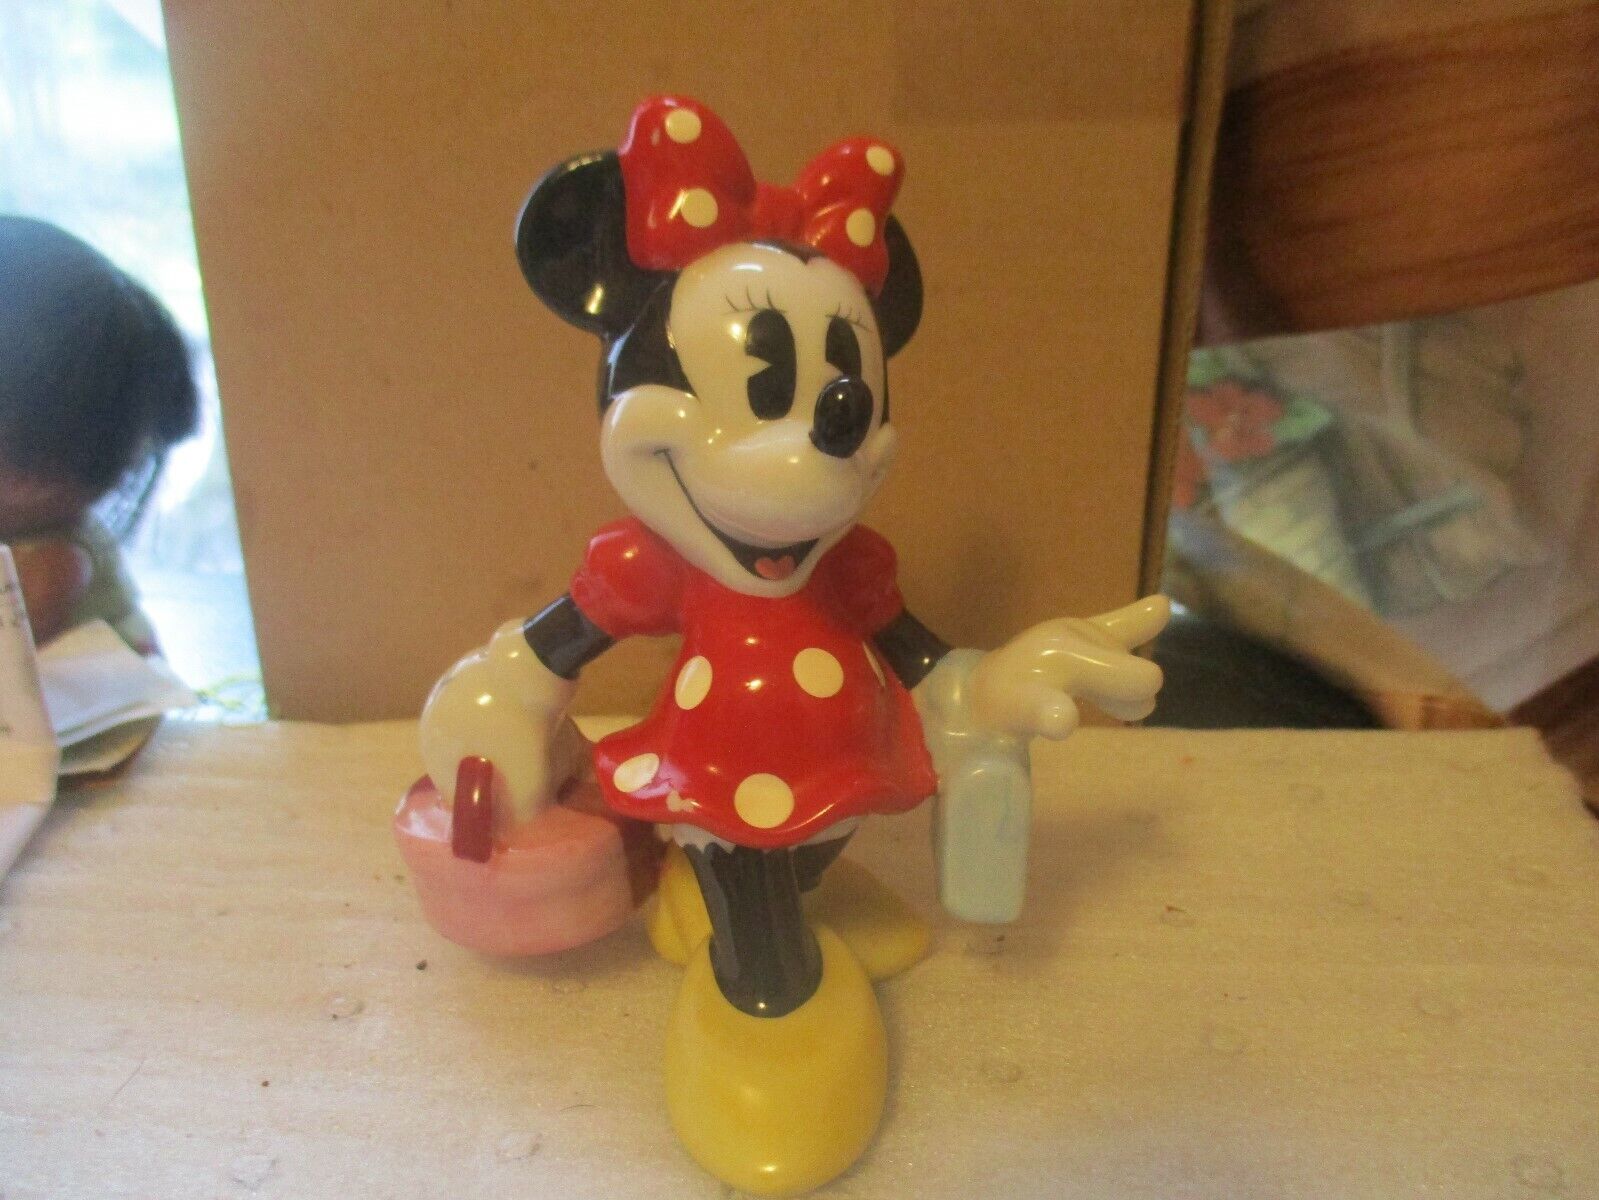 MINNIE MOUSE SHOPPING FIGURINE